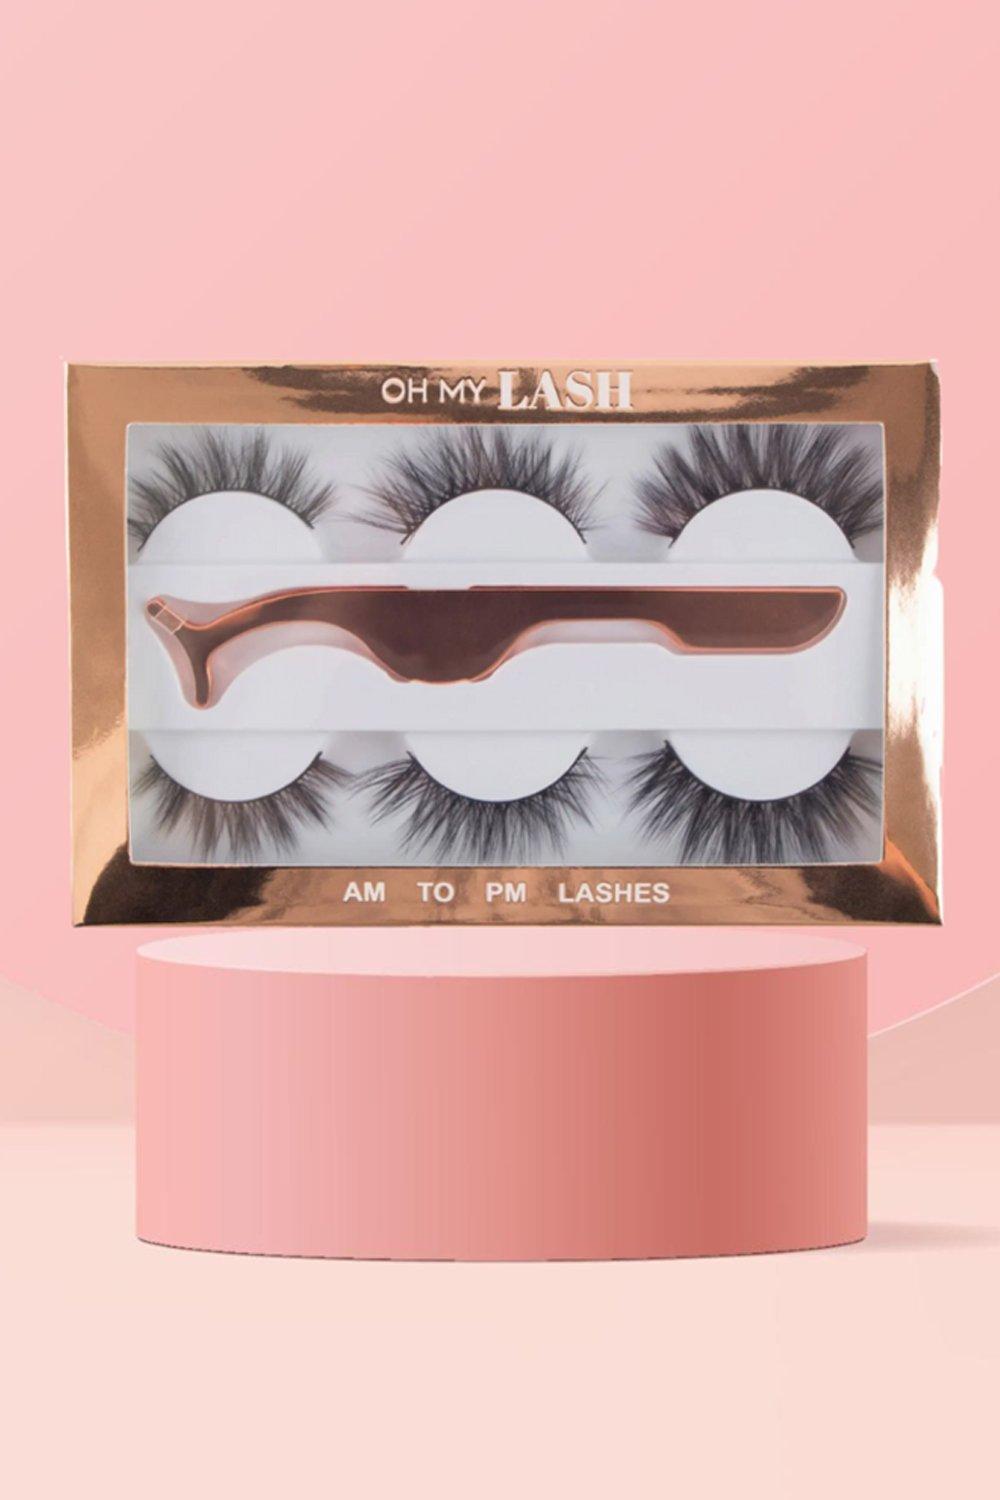 Boohoo Oh My Lash Am To Pm Lash Set- Pink  - Size: ONE SIZE